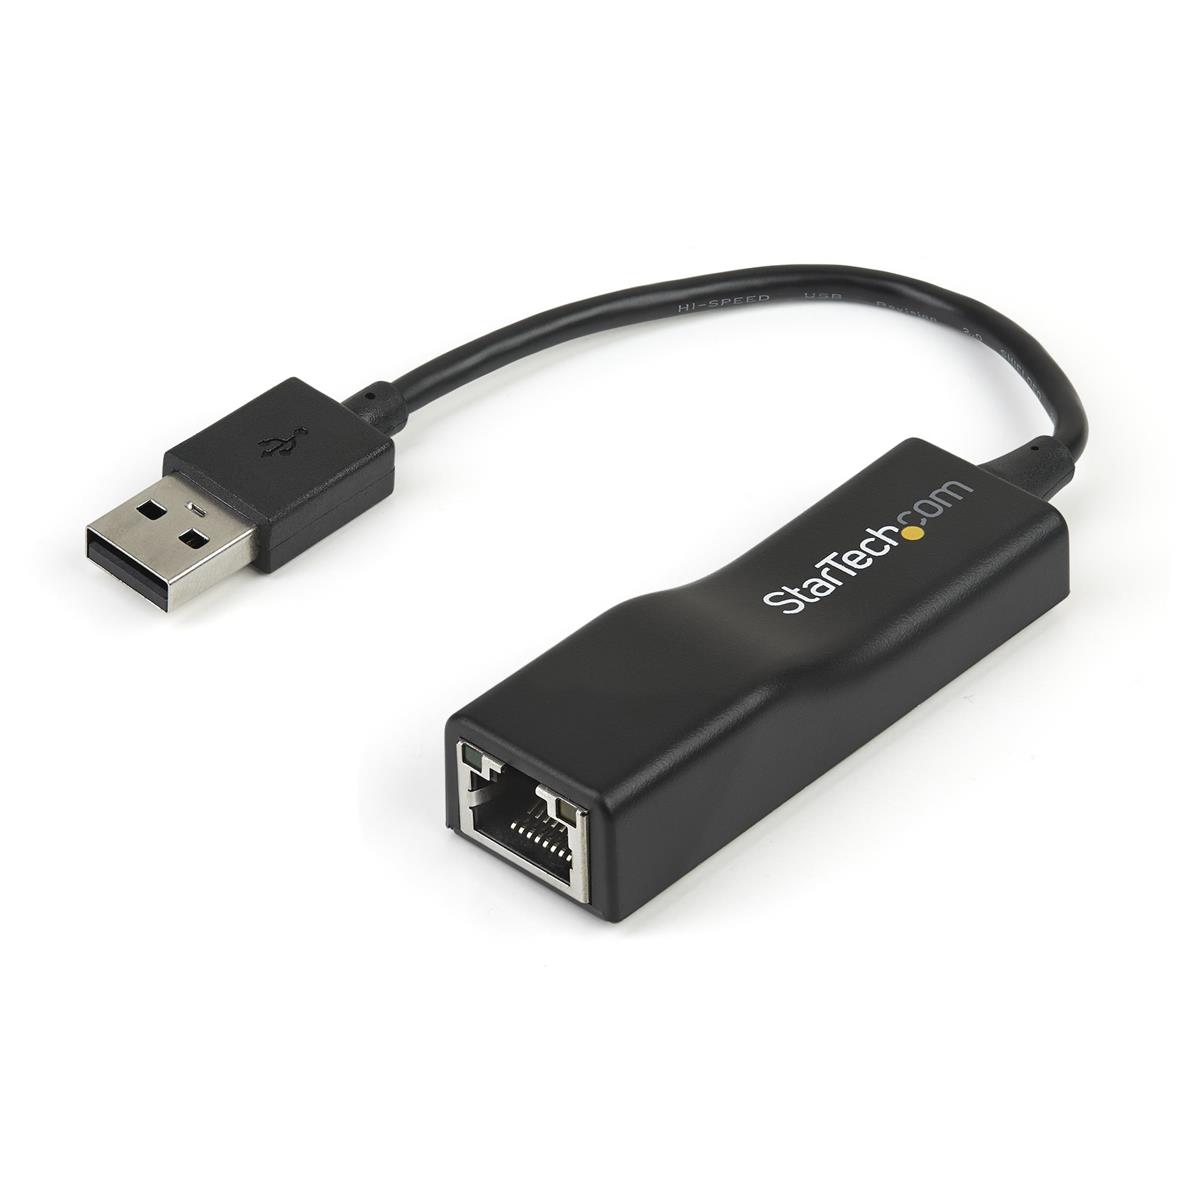 Image of StarTech USB 2.0 to 10/100Mbps Ethernet Network Adapter Dongle